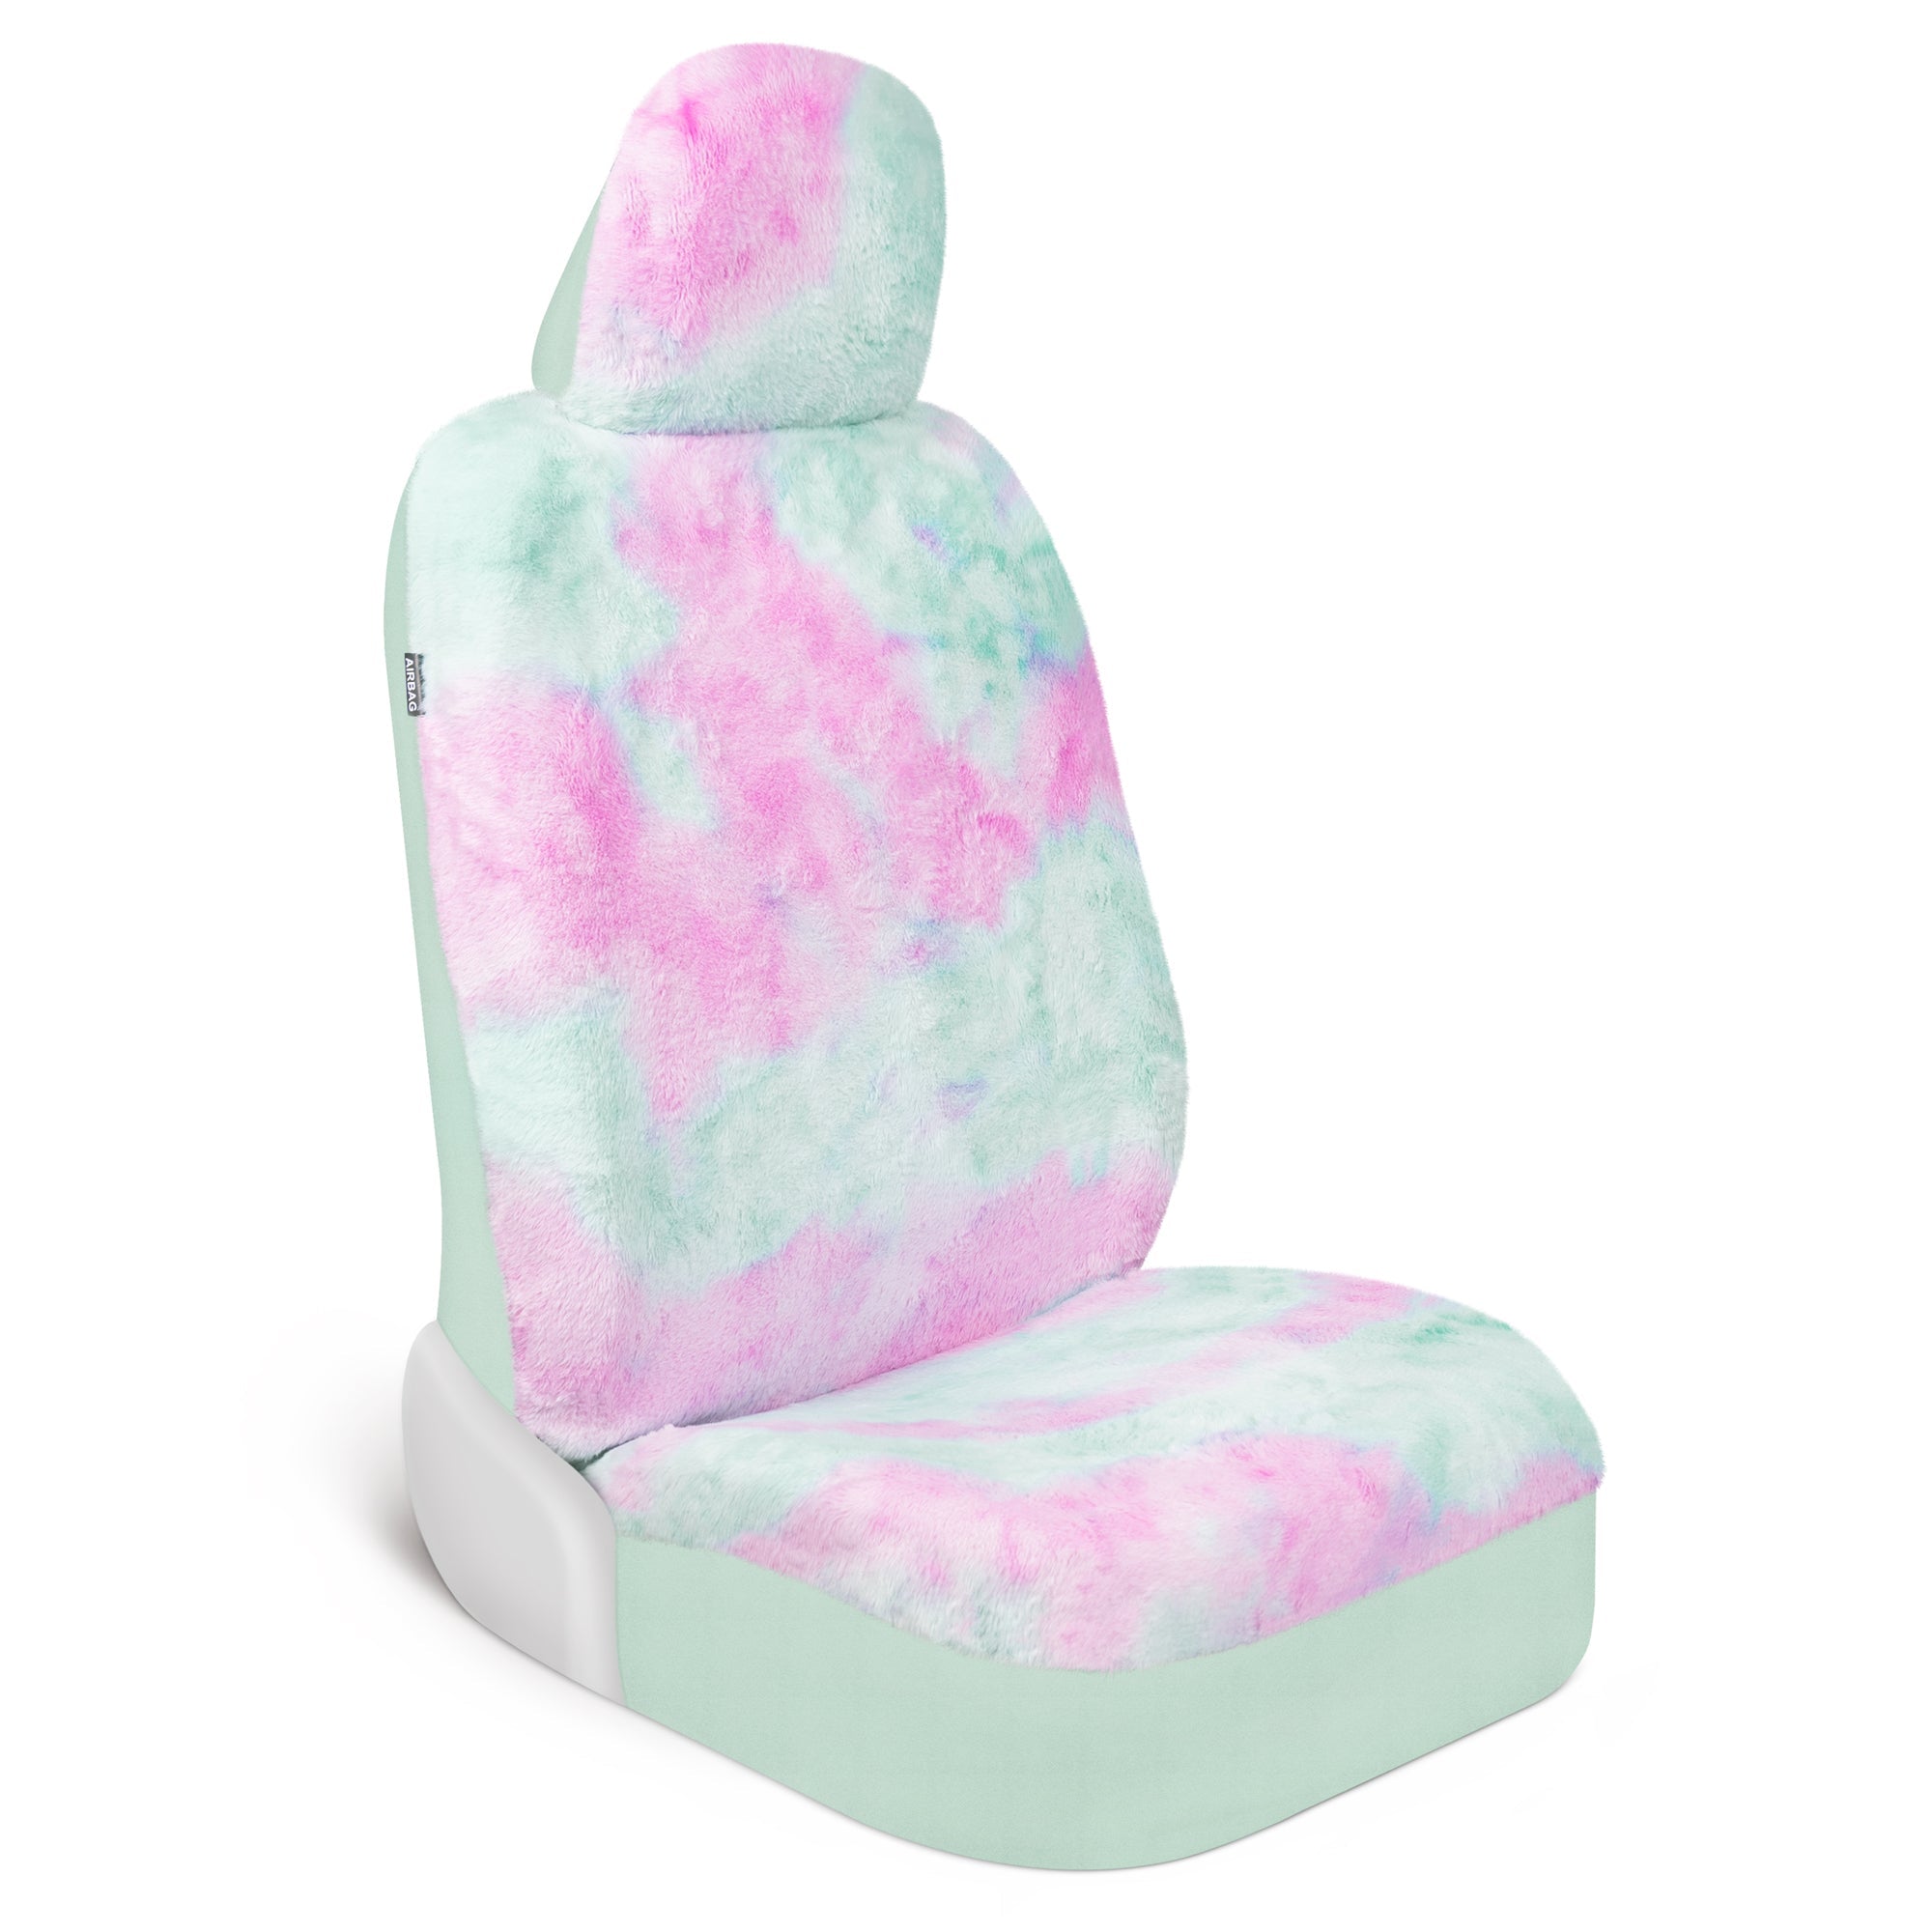 Carbella Tie-Dye Faux Fur Car Seat Cover, 1 Piece Mint Sheepskin Front Seat Cover for Cars with Soft and Plush Touch, Cute Automotive Interior Cover for Trucks Van SUV, Car Accessories for Women